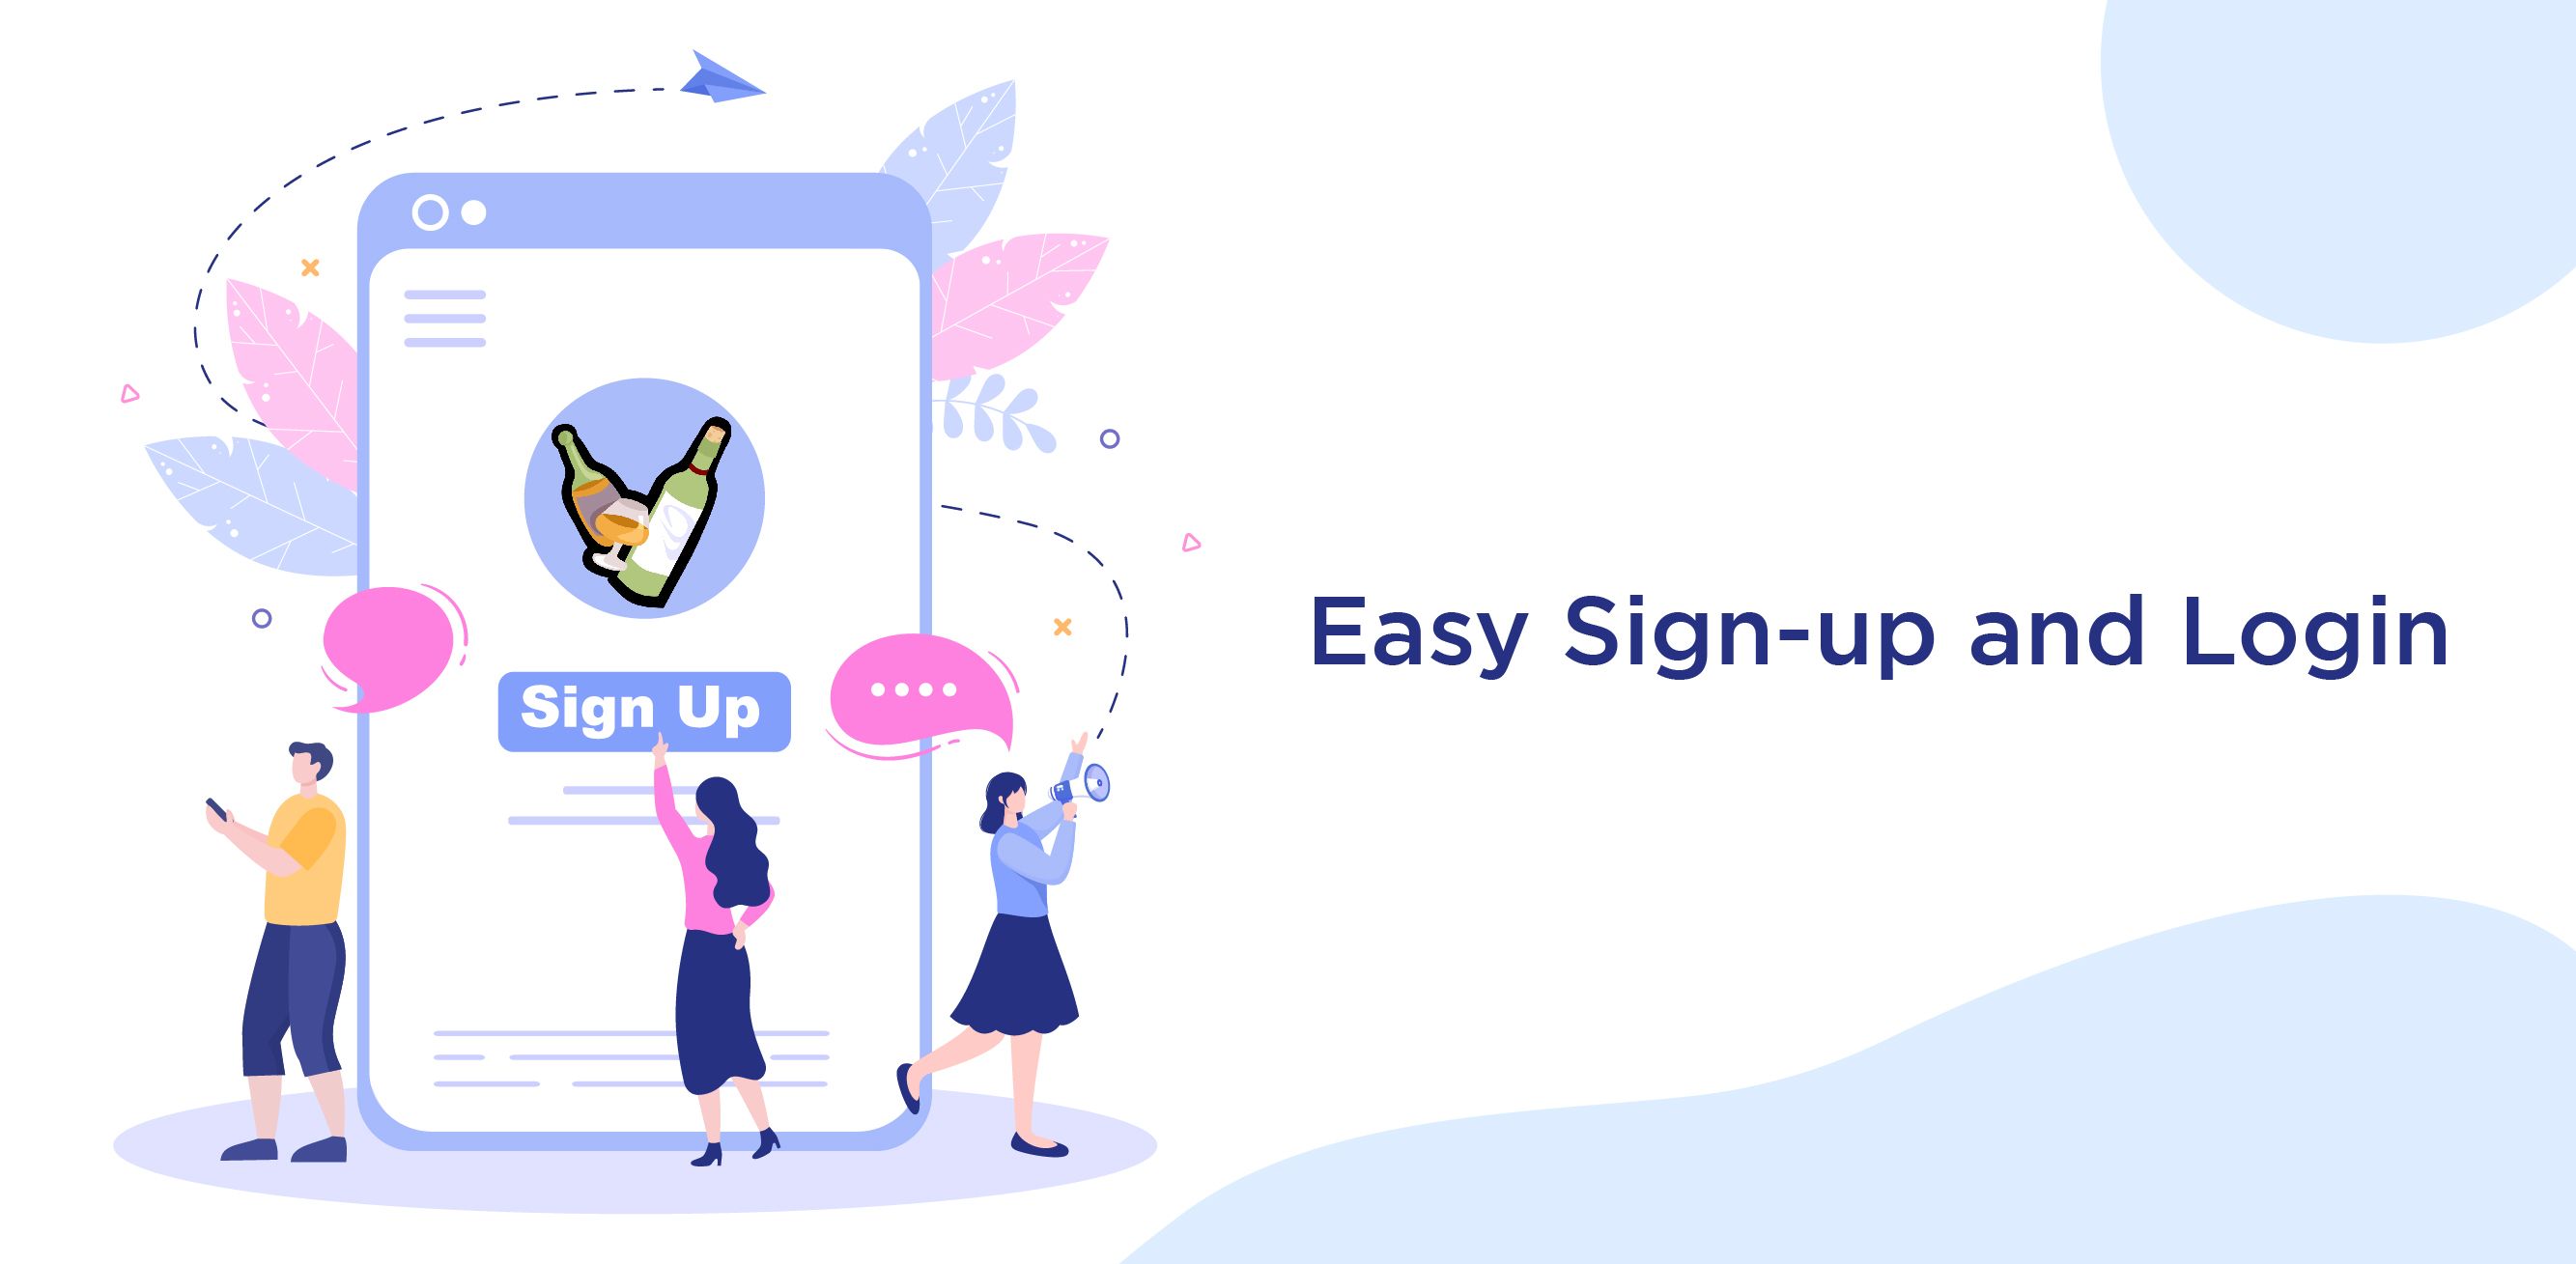 Easy Sign-up and Login